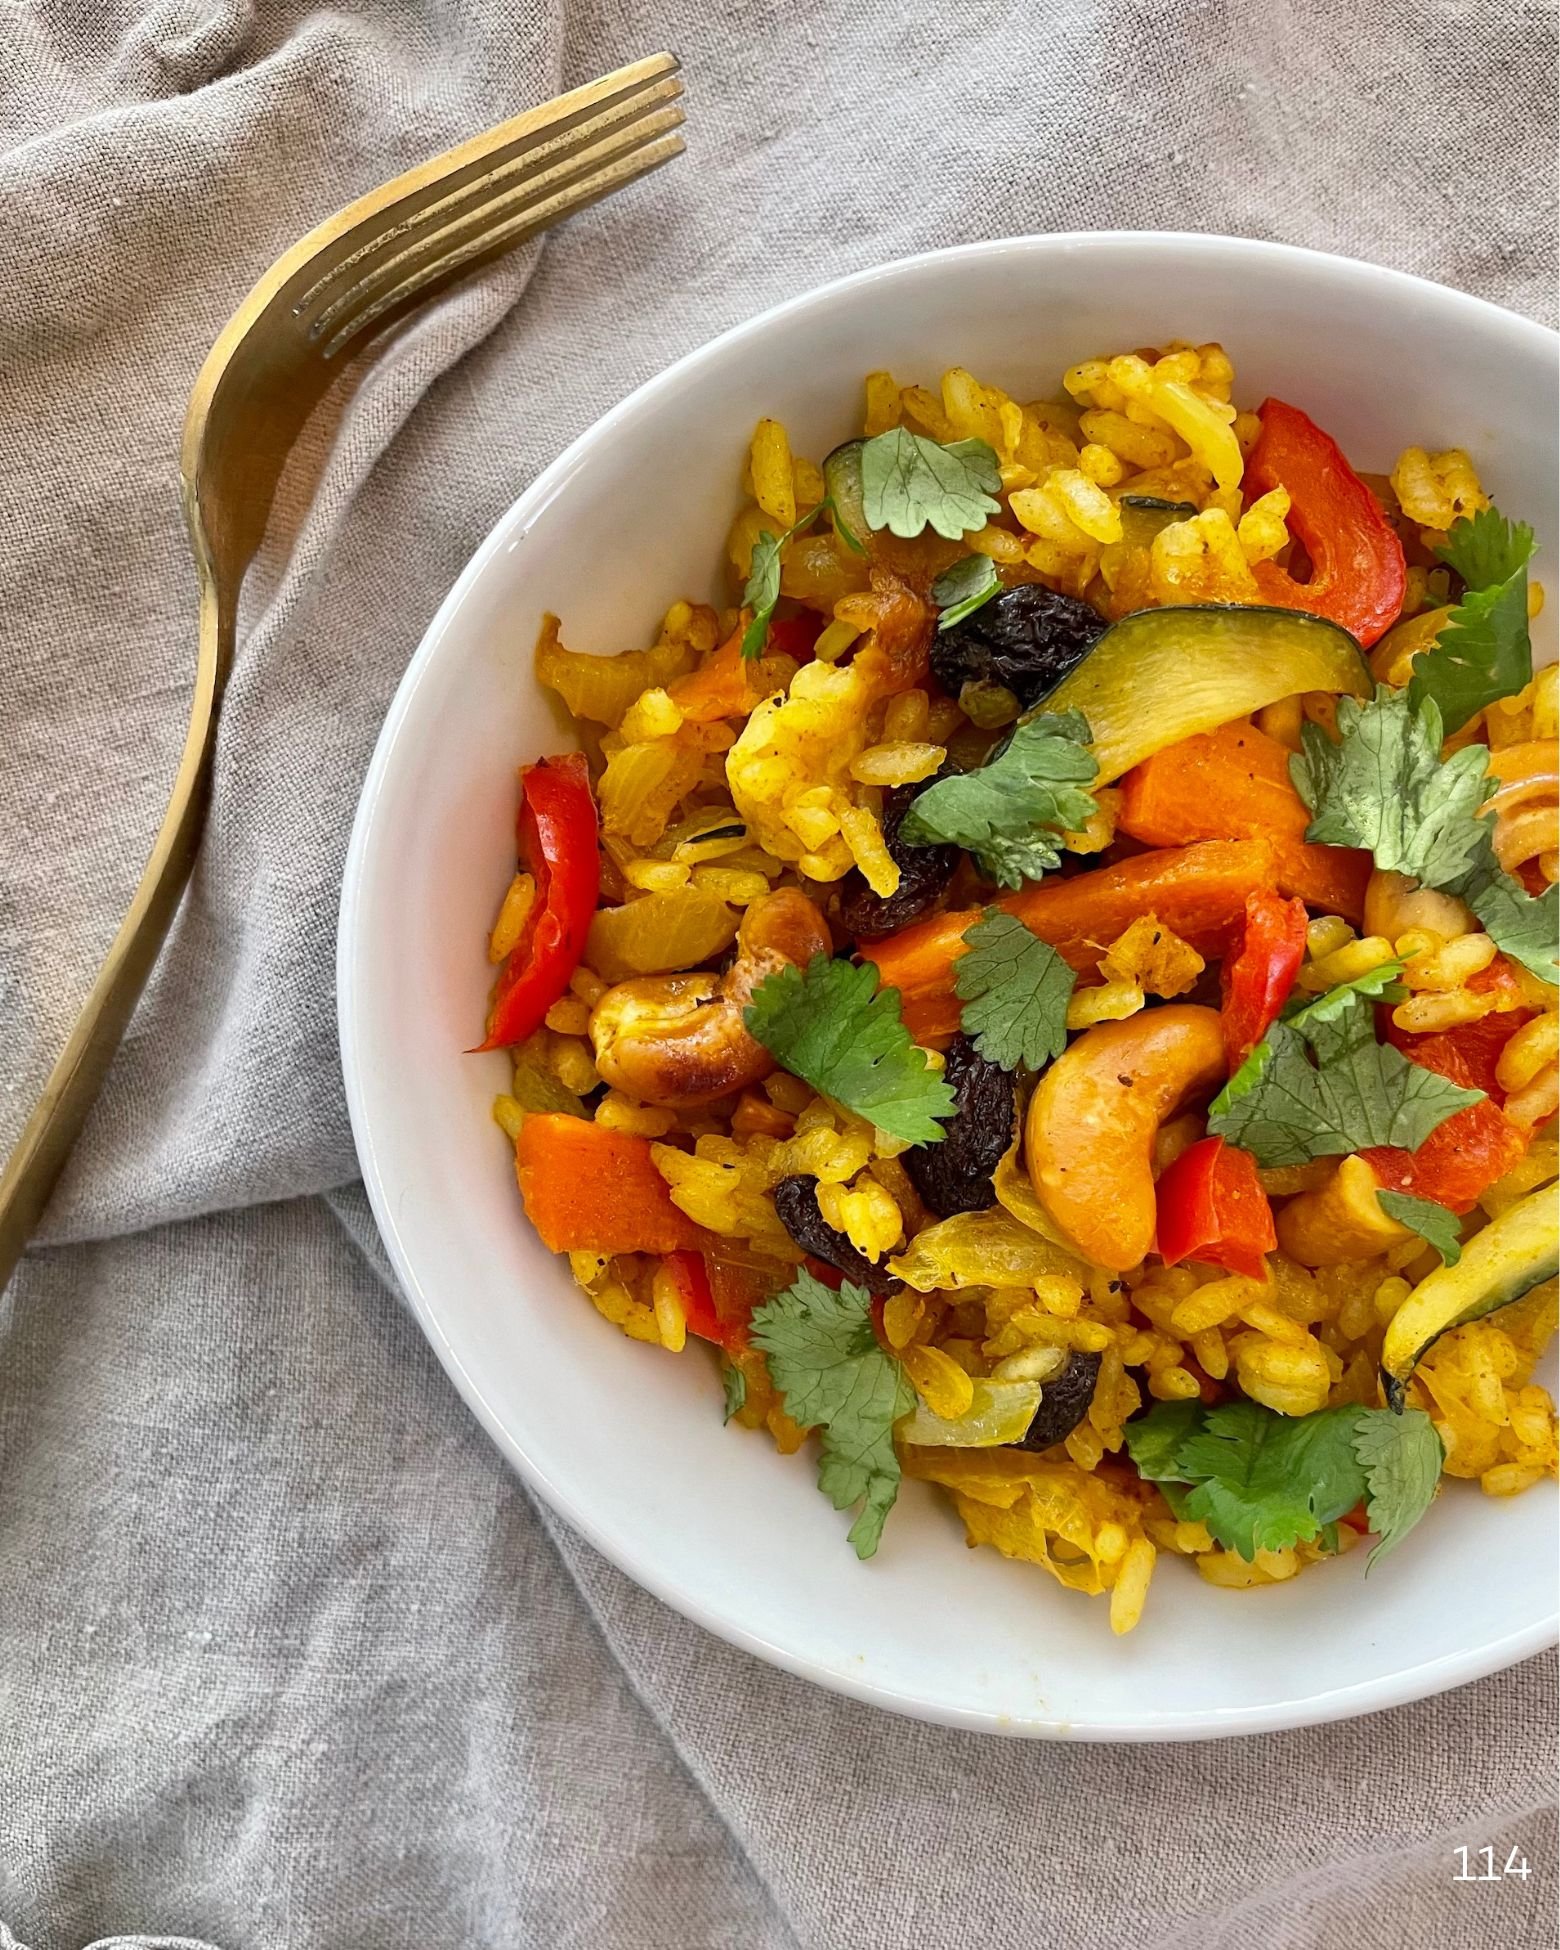 Curried Rice and Veggies Recipe in a bowl